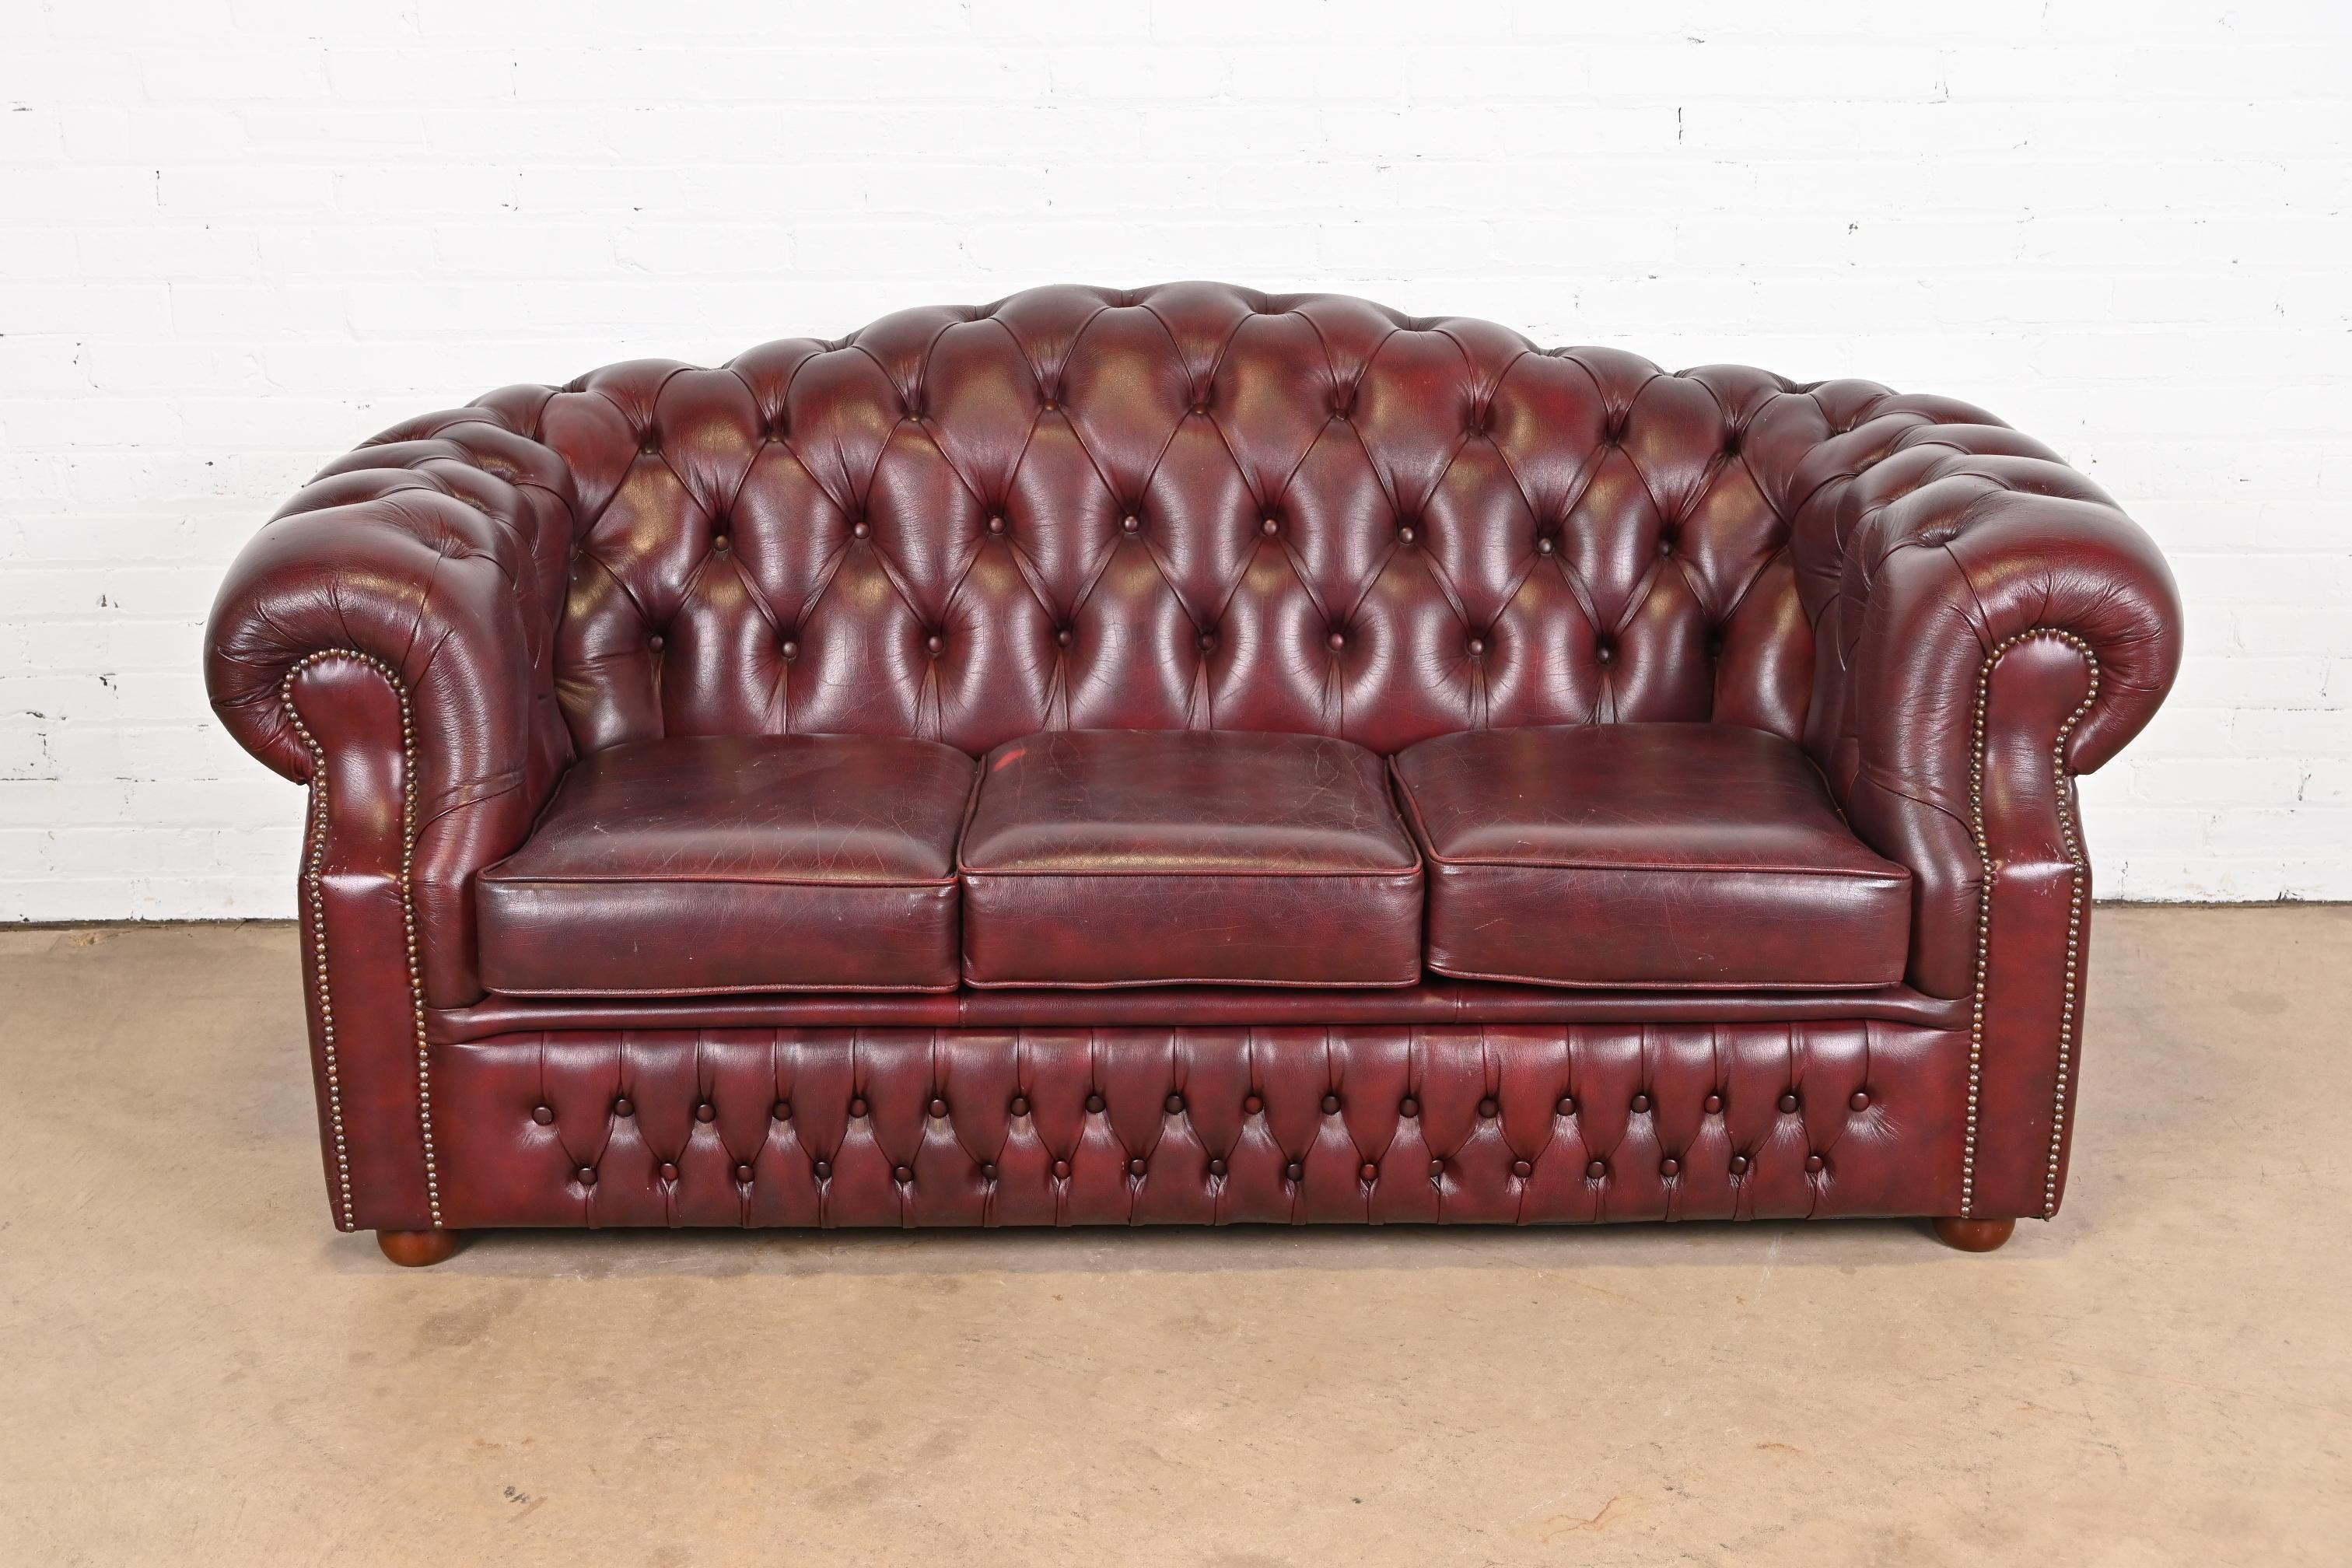 A gorgeous vintage camelback Chesterfield sofa

England, Circa Late 20th Century

Tufted oxblood leather, with brass studs and mahogany bun feet.

Measures: 76